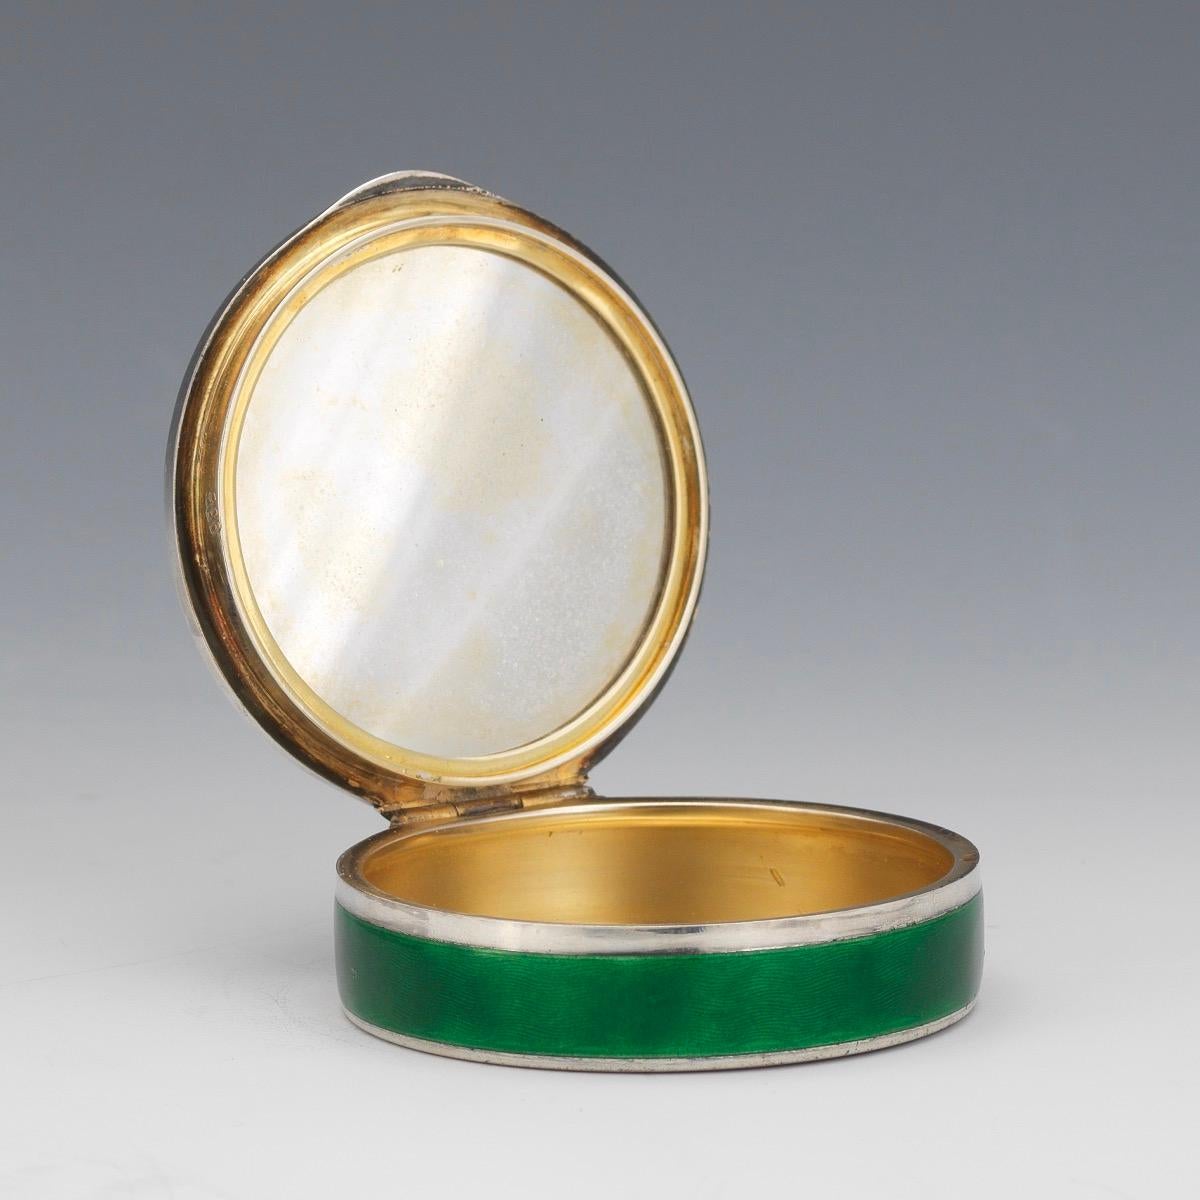 Edwardian Early 20th Century Continental Silver Gilt and Green Guilloche Enamel Box